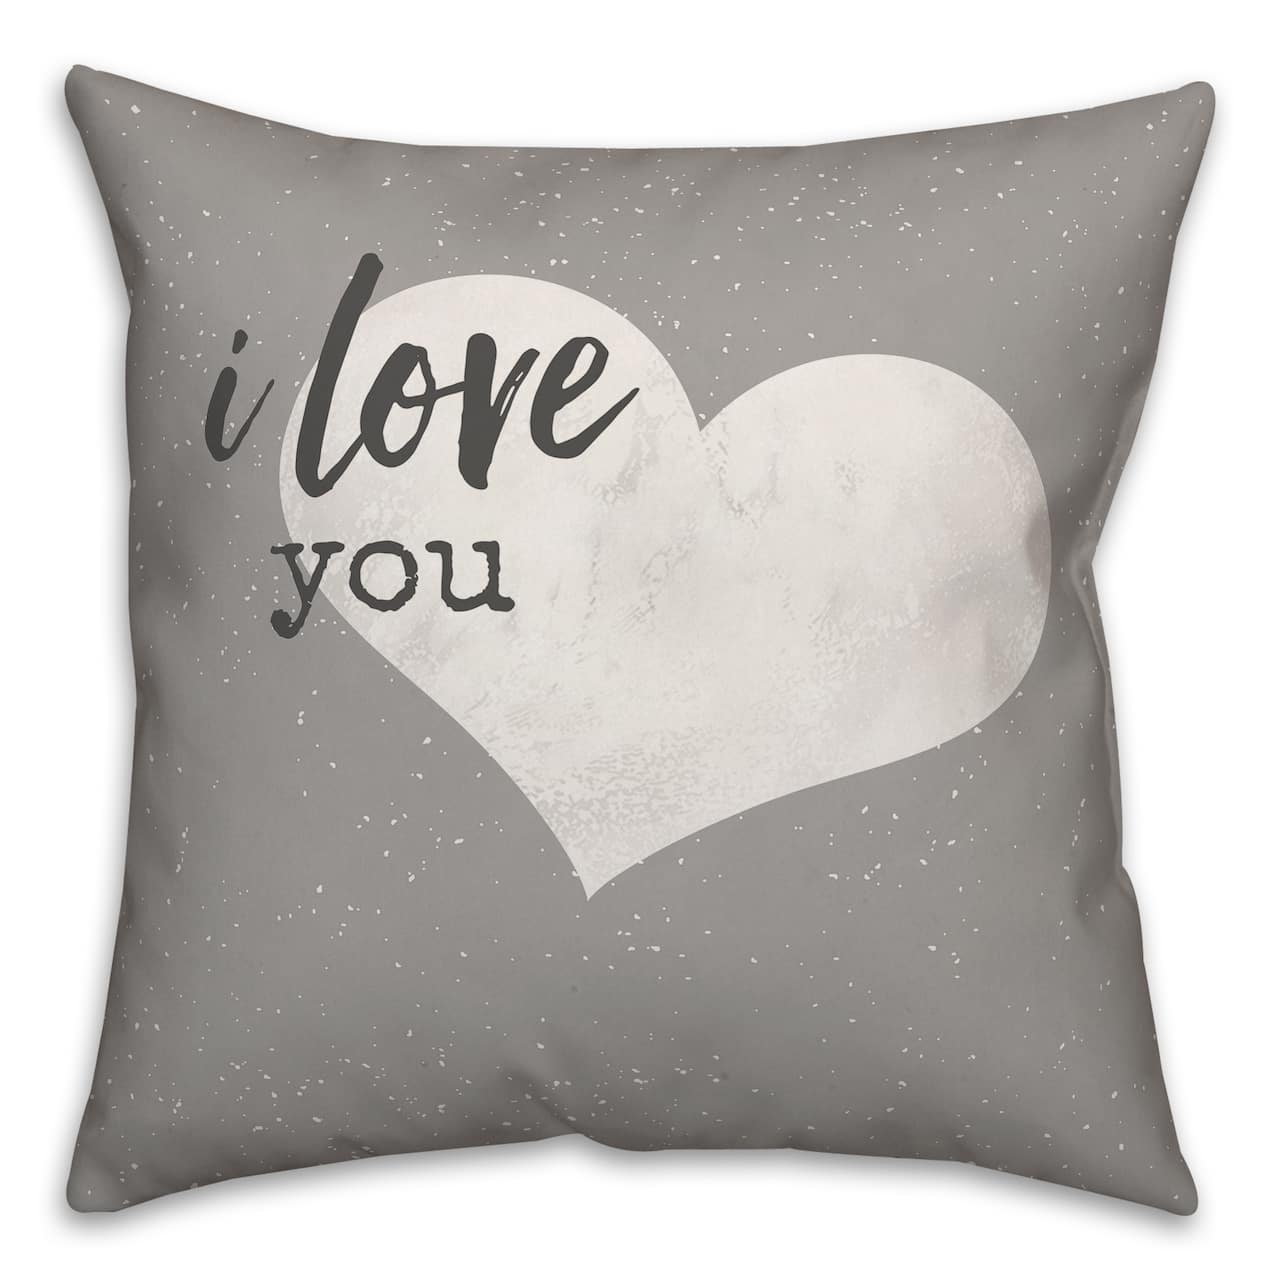 I Love You to the Moon and Back Reversible Throw Pillow